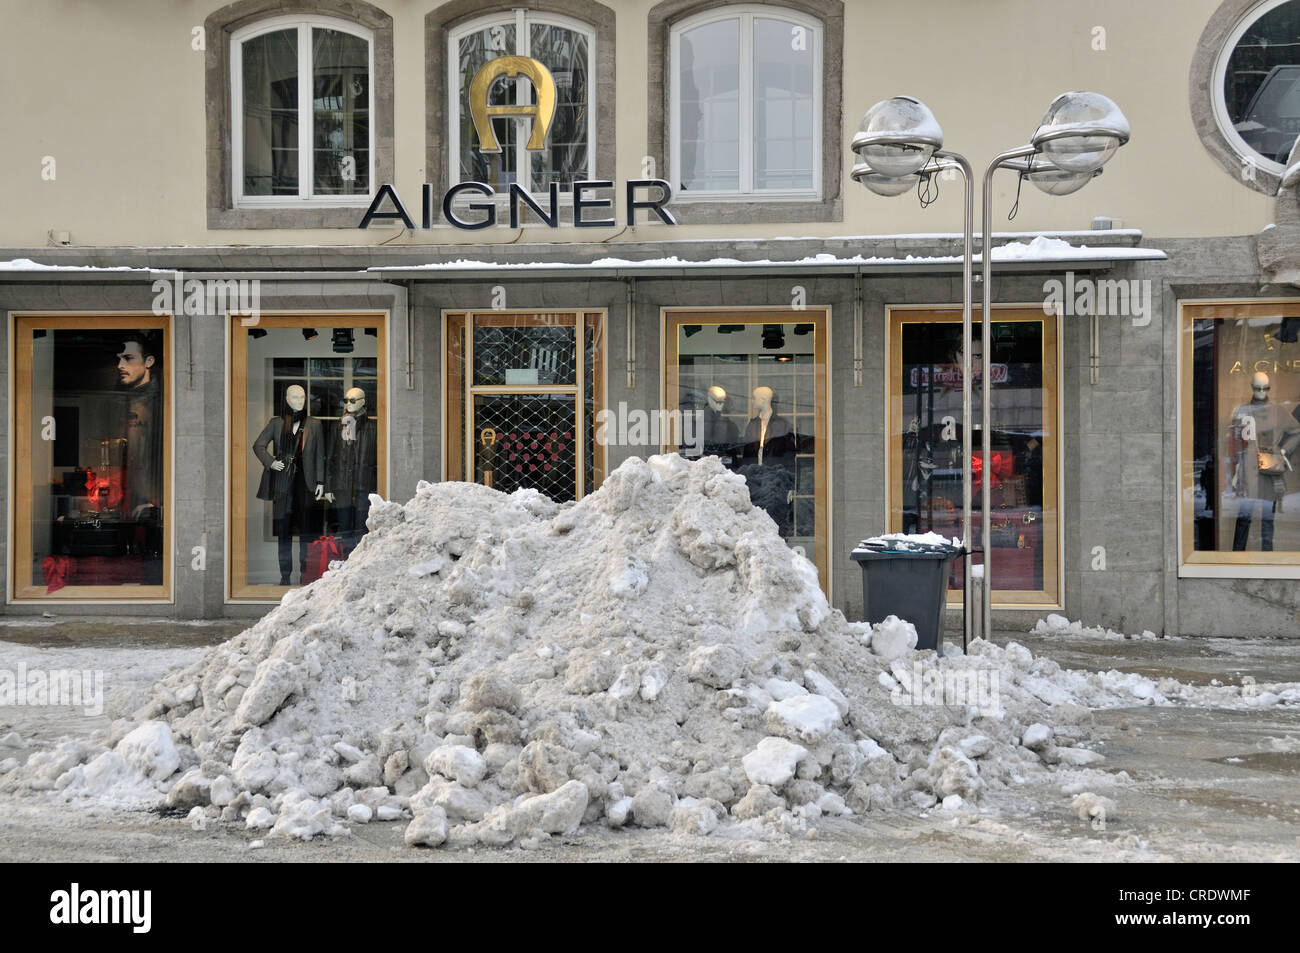 Etienne Aigner Resolution Photography Images - Alamy